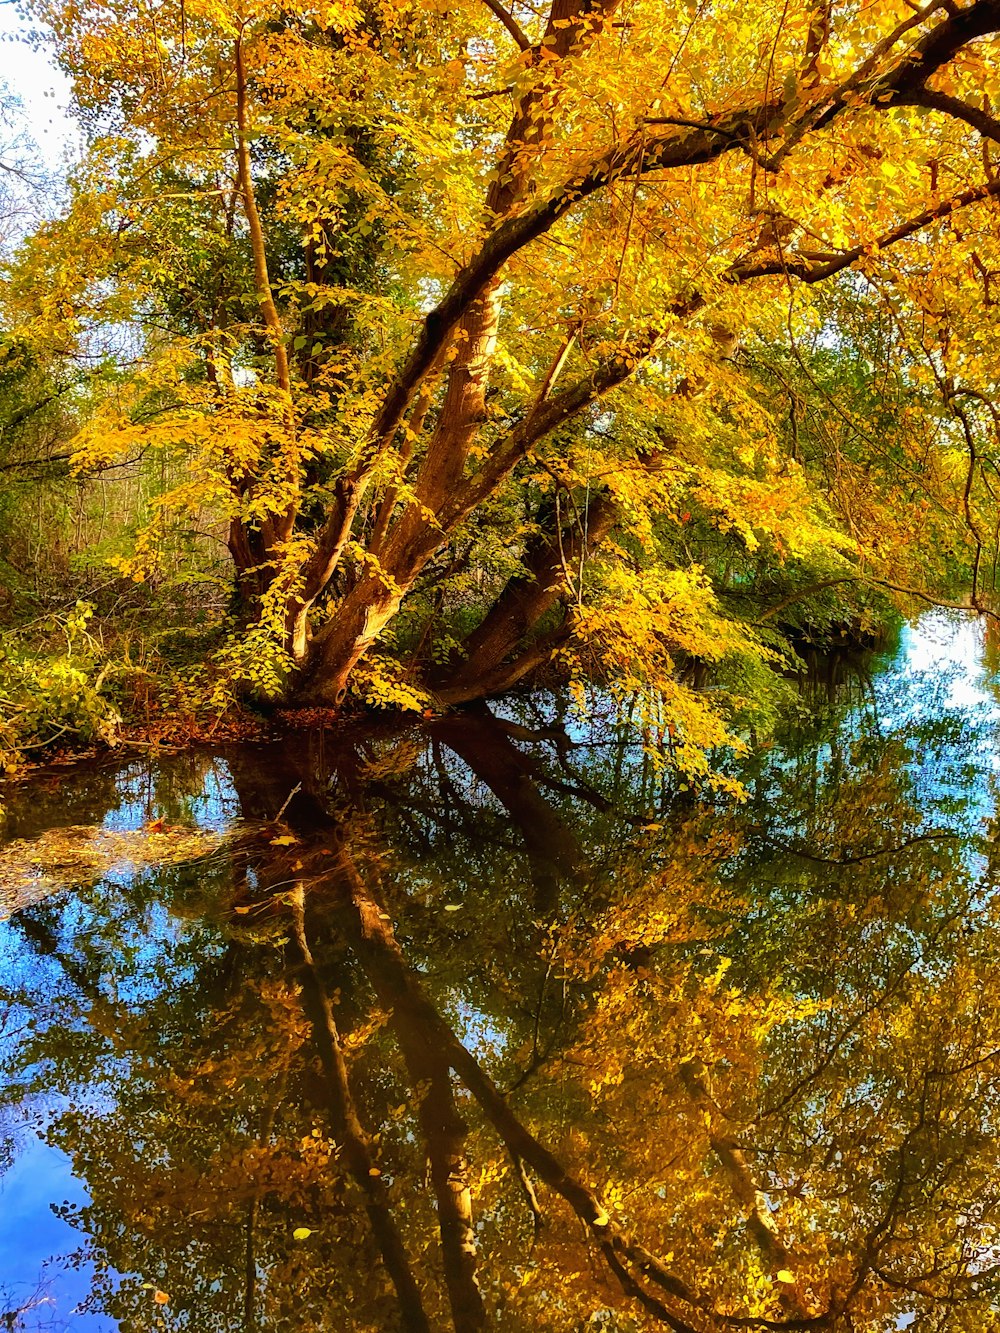 a river surrounded by trees with yellow leaves